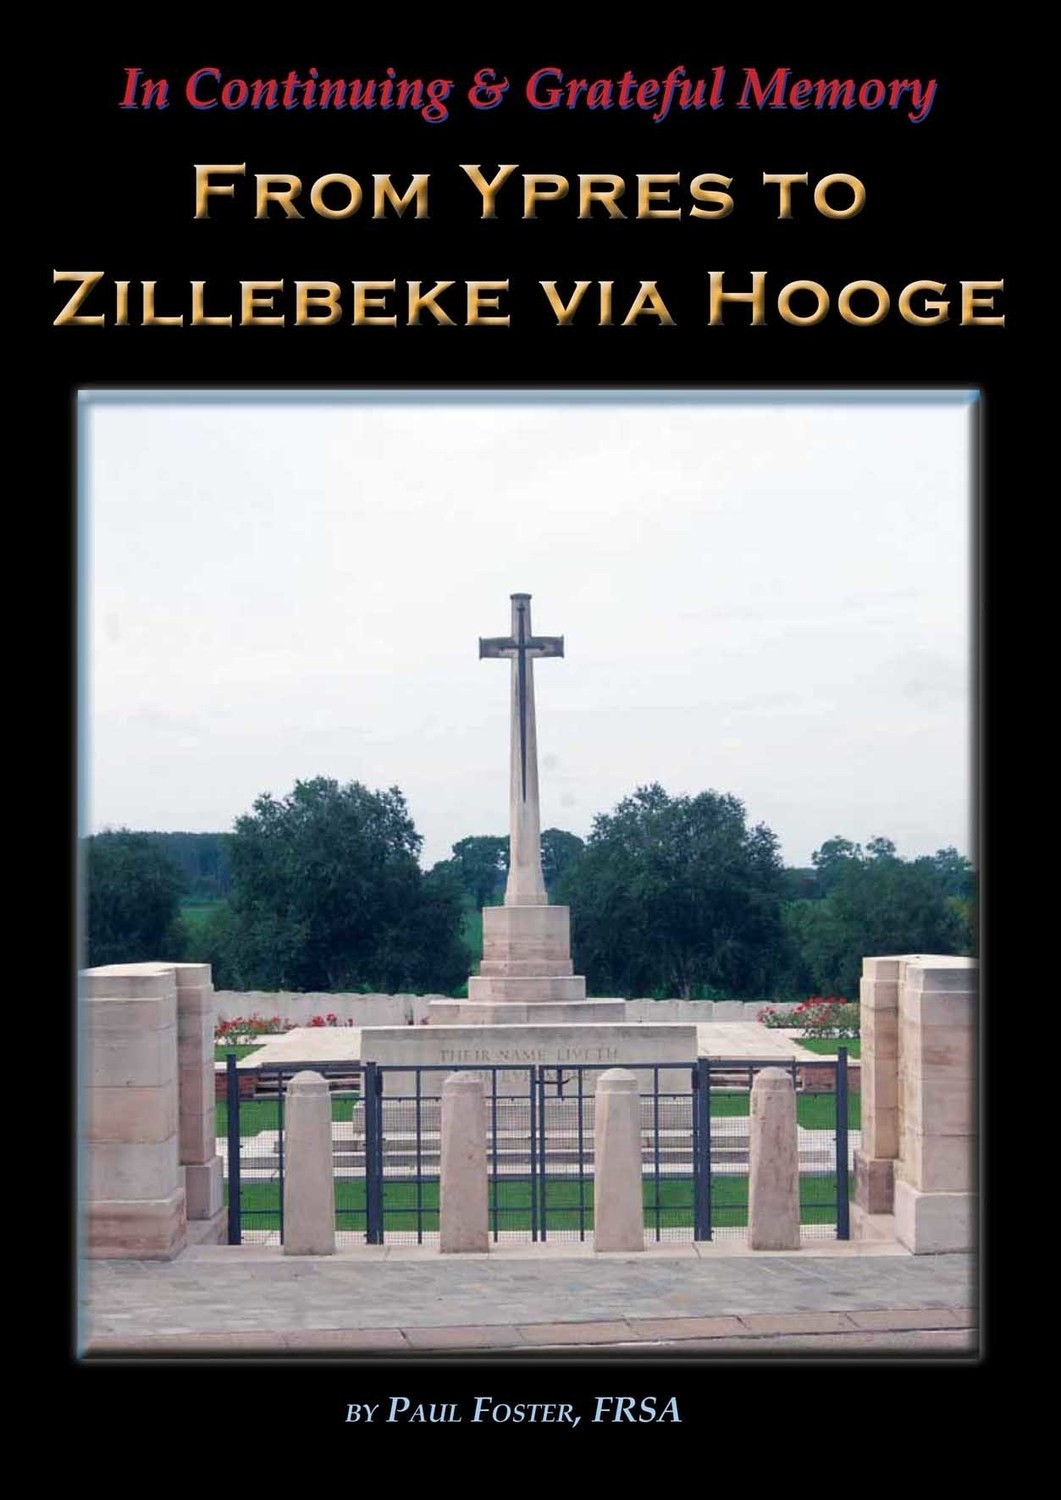 In Continuing & Grateful Memory — From Ypres to Zillebeke via Hooge